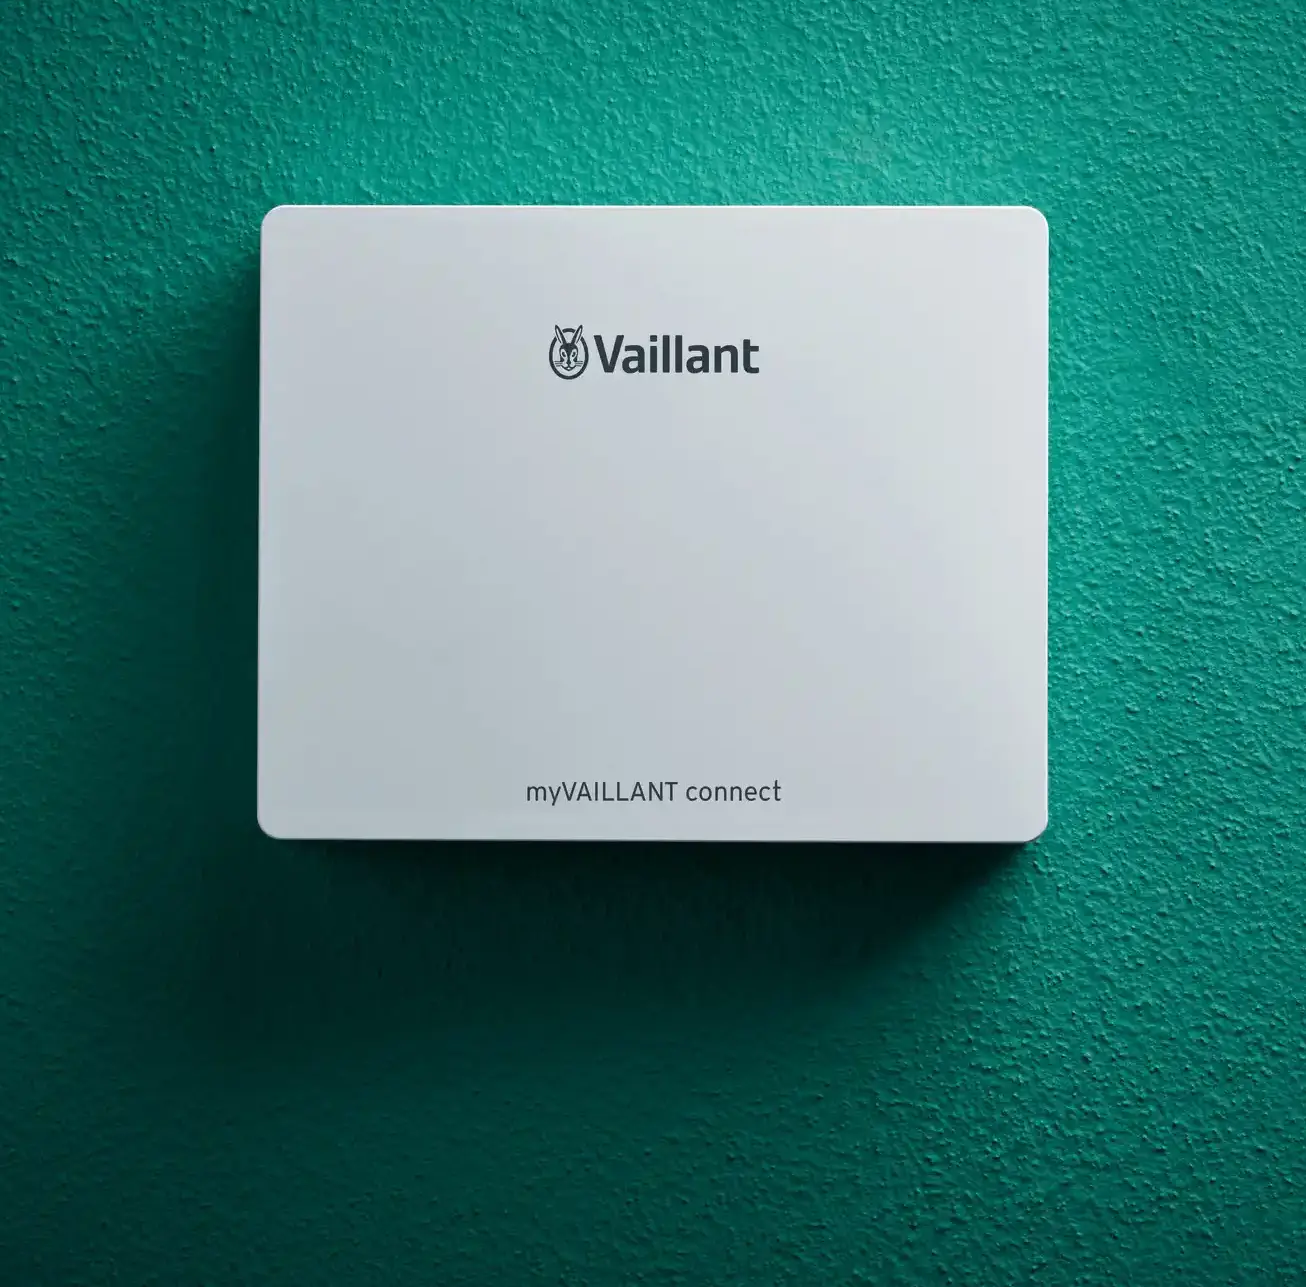 myVAILLANT connect on a green background